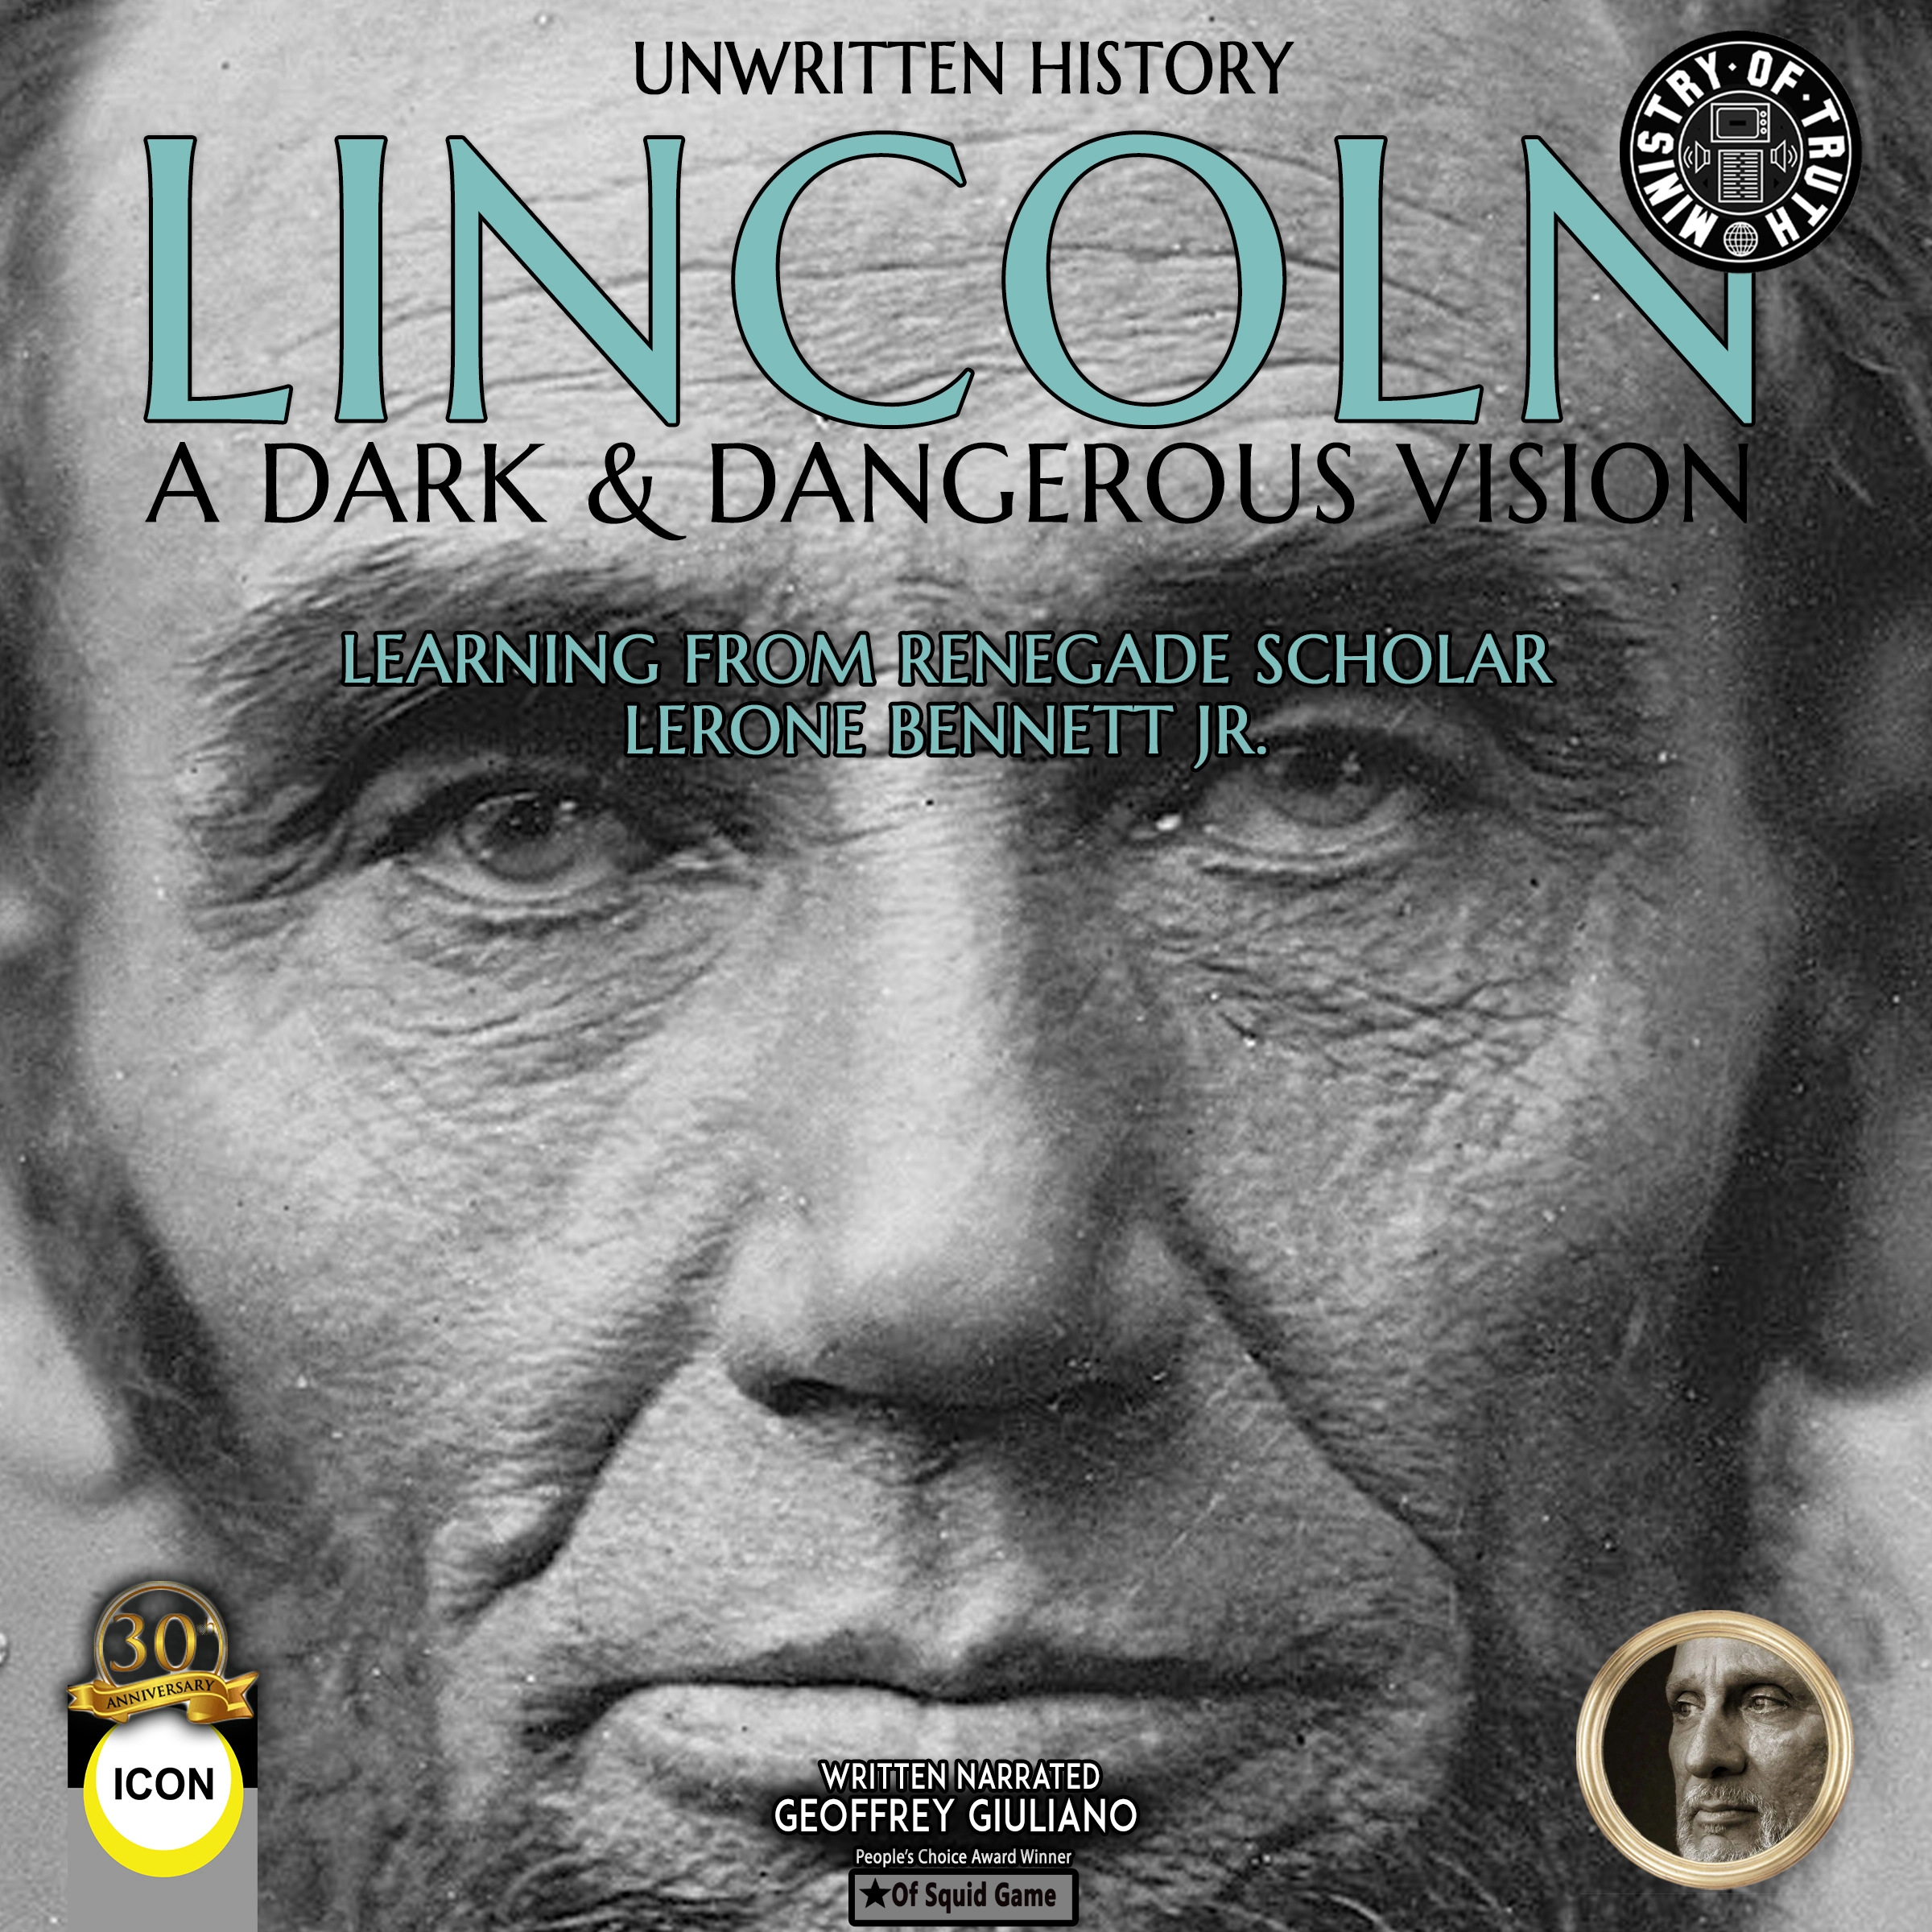 Unwritten History Lincoln A Dark & Dangerous Vision by Geoffrey Giuliano Audiobook